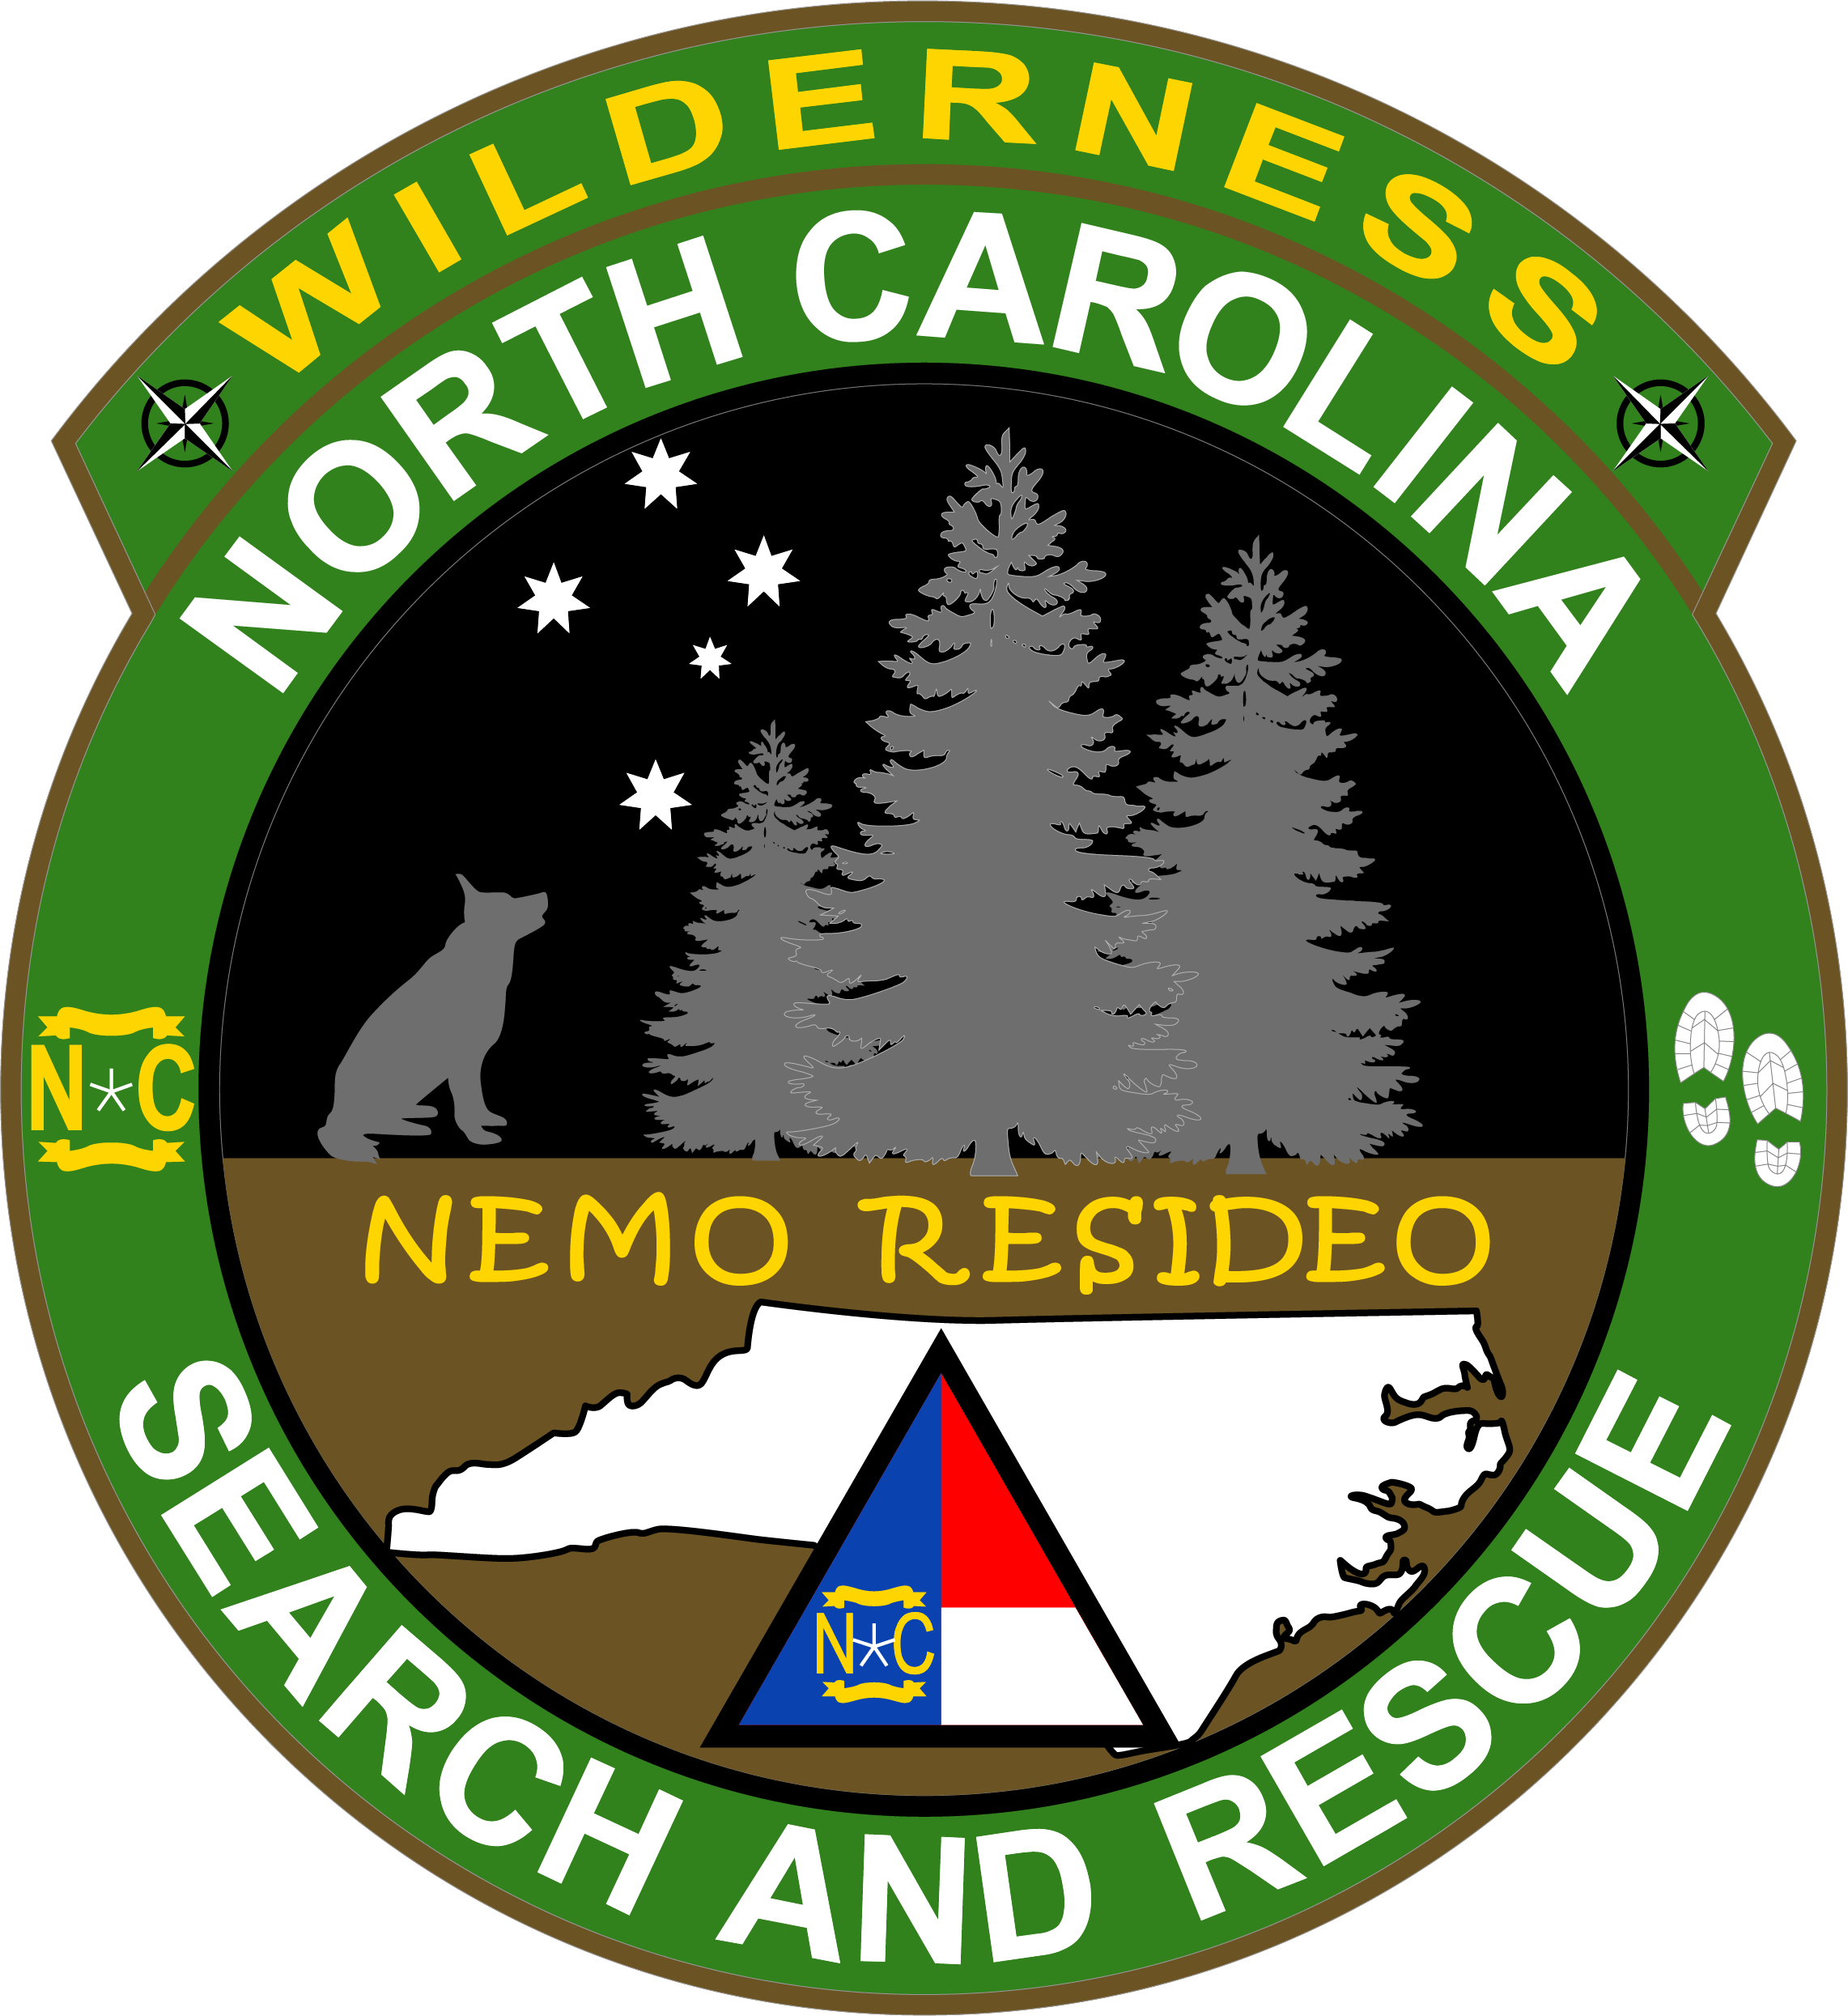 Search and Rescue Logo - NC DPS: Wilderness Search & Rescue